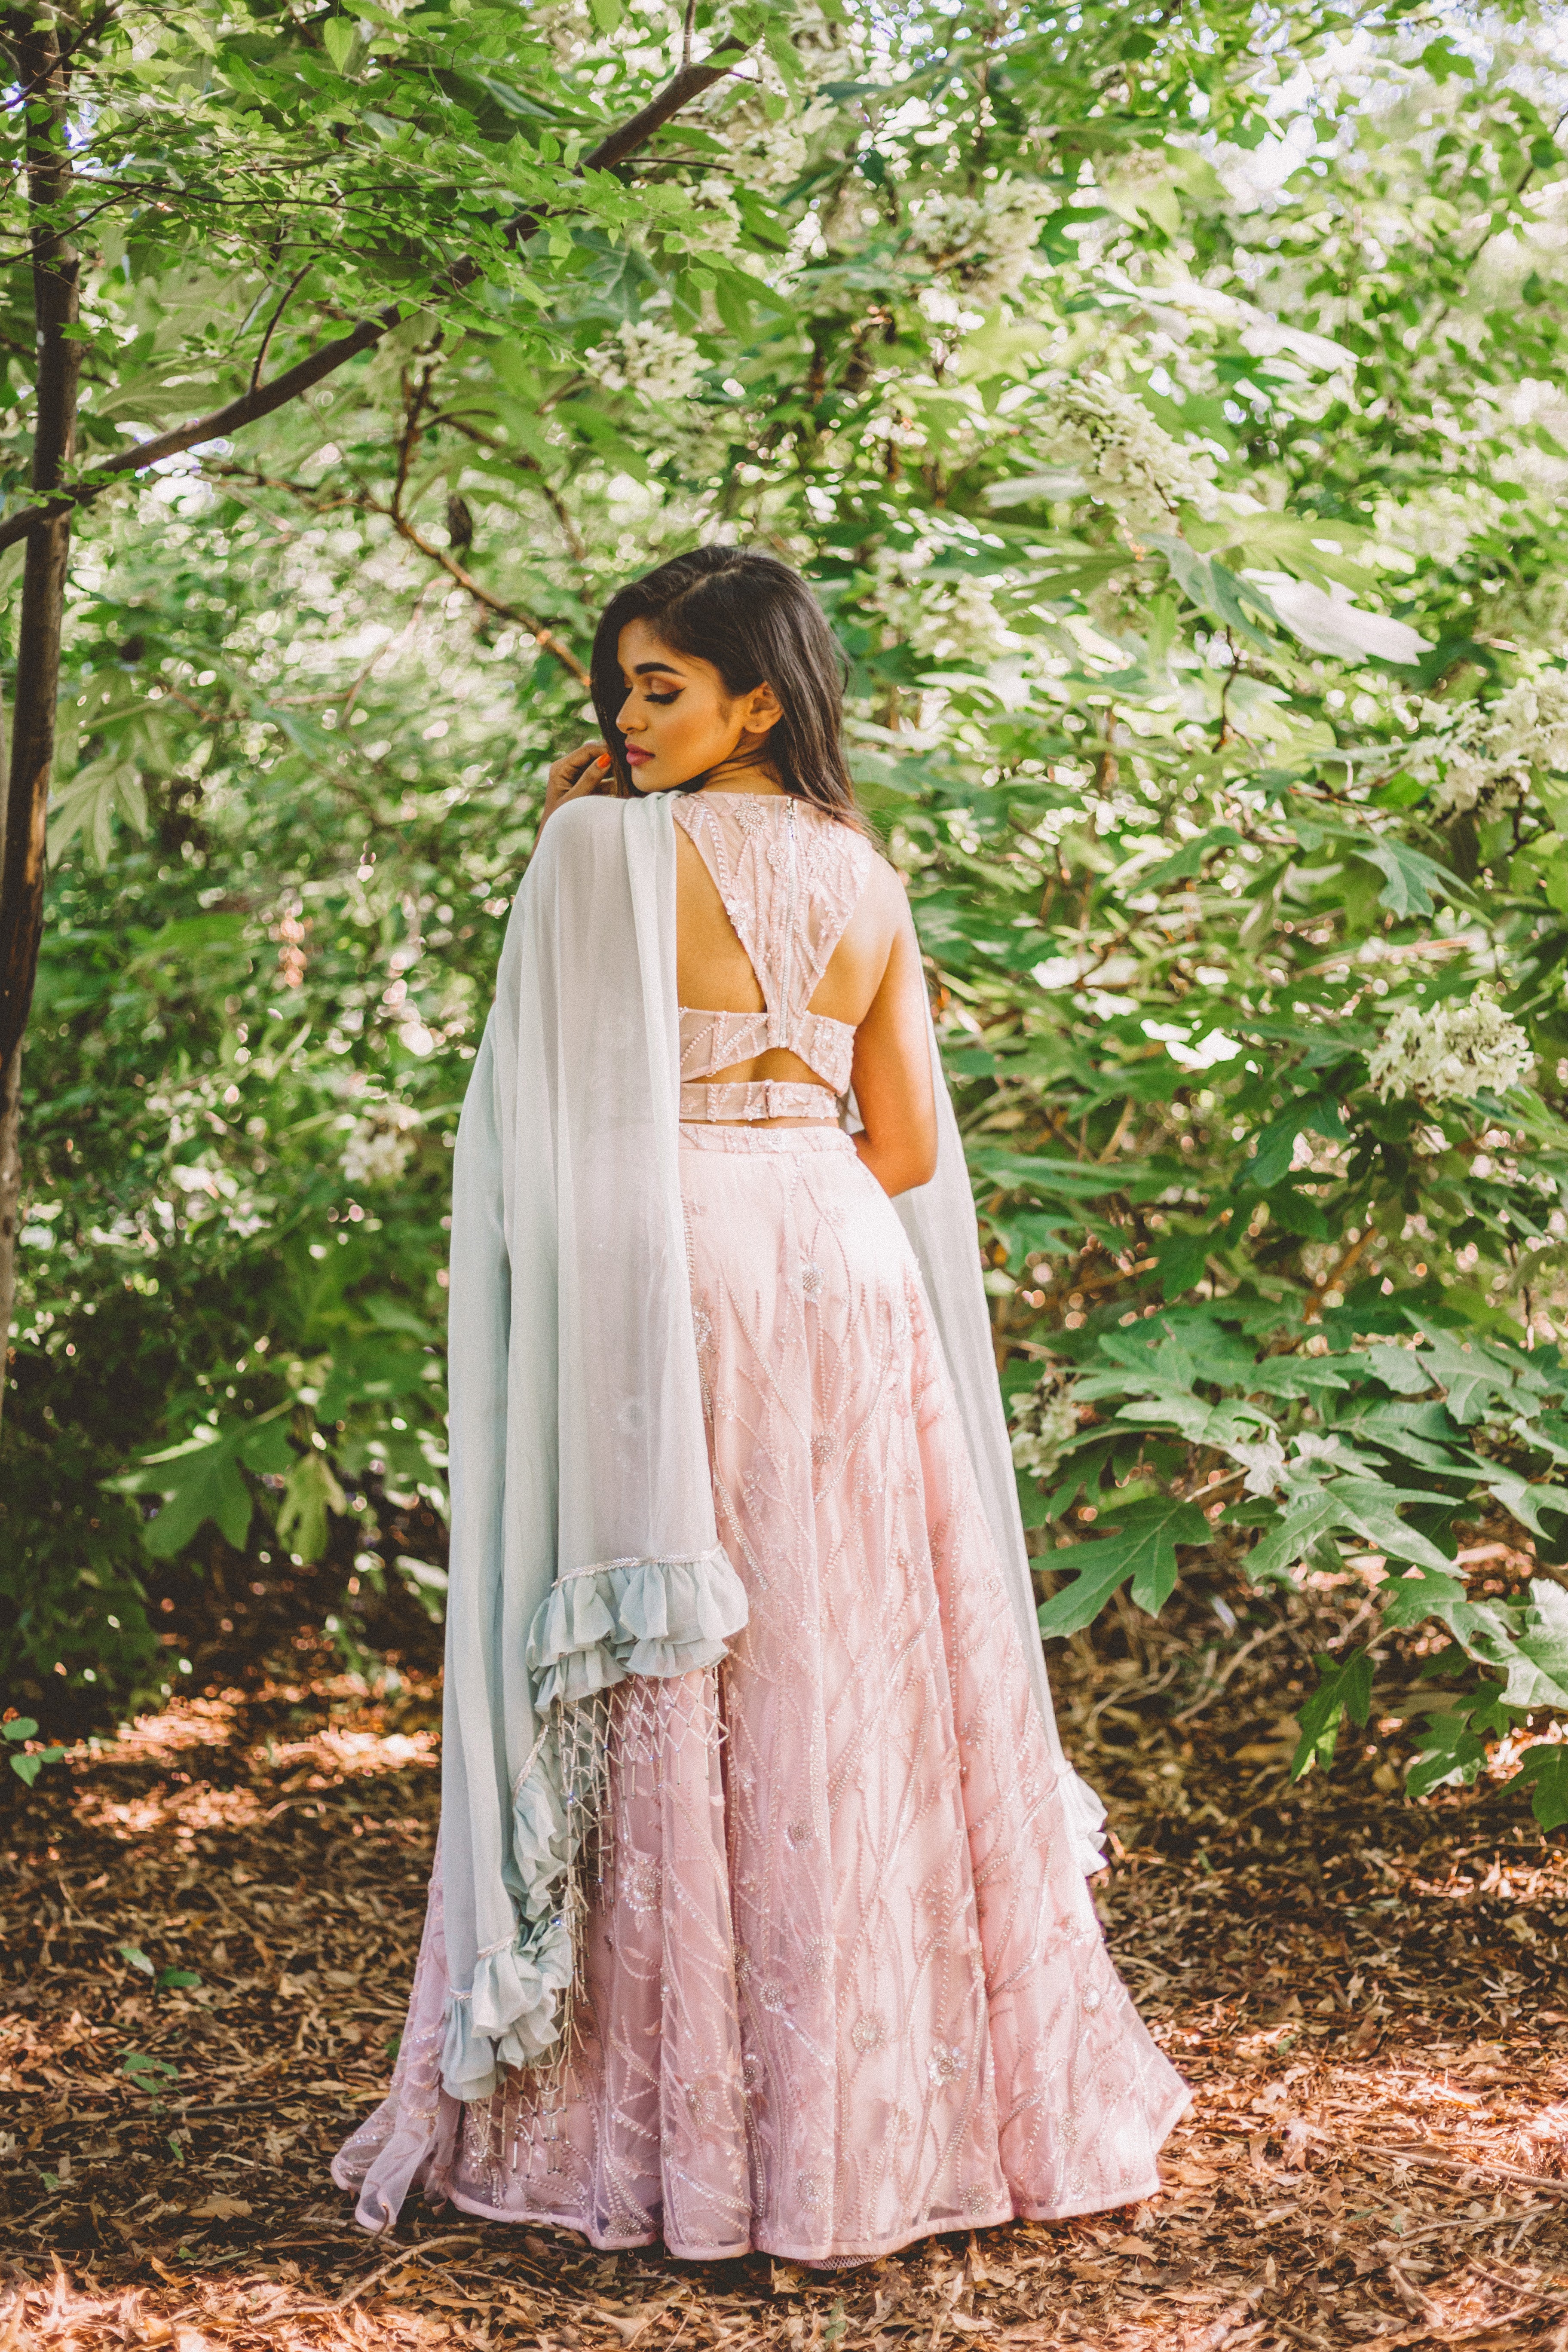 Lavender Pink Lehenga With Sexy Back Blouse And Pastel Green Ruffle Dupatta - Available At Sushma Patel Boutique in Atlanta, USA